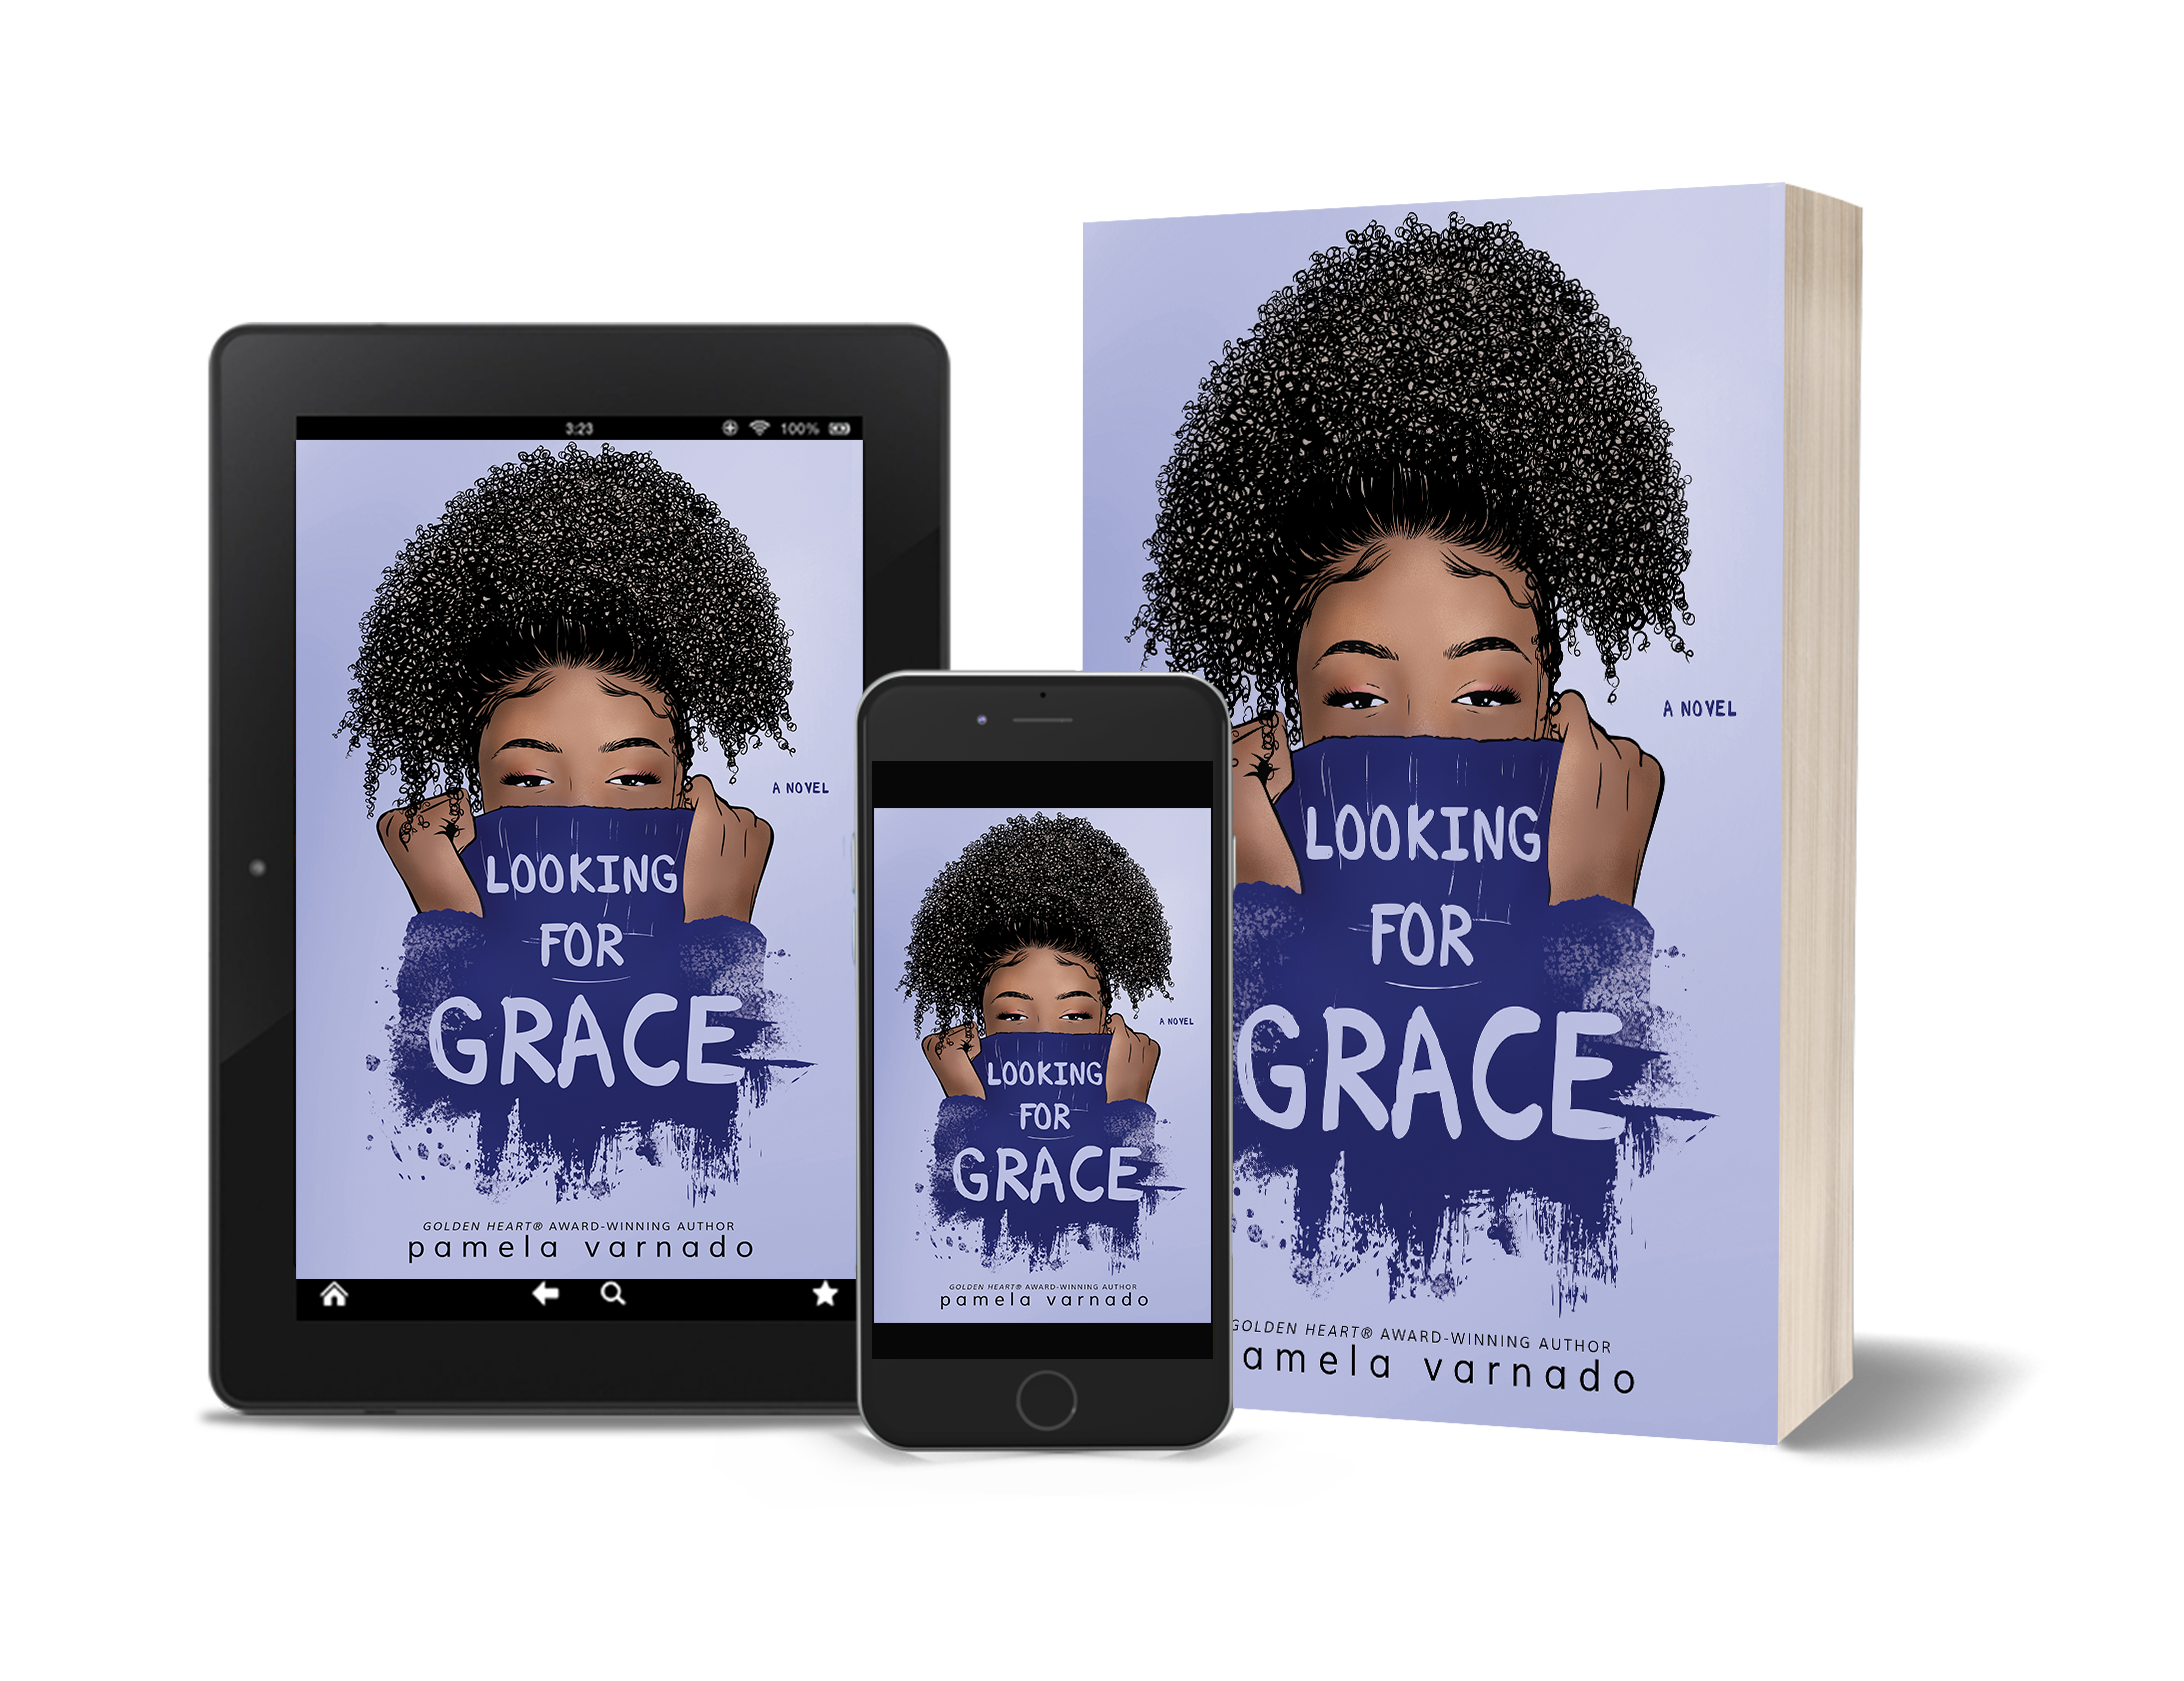 Looking for Grace - available in paperback and ebook formats